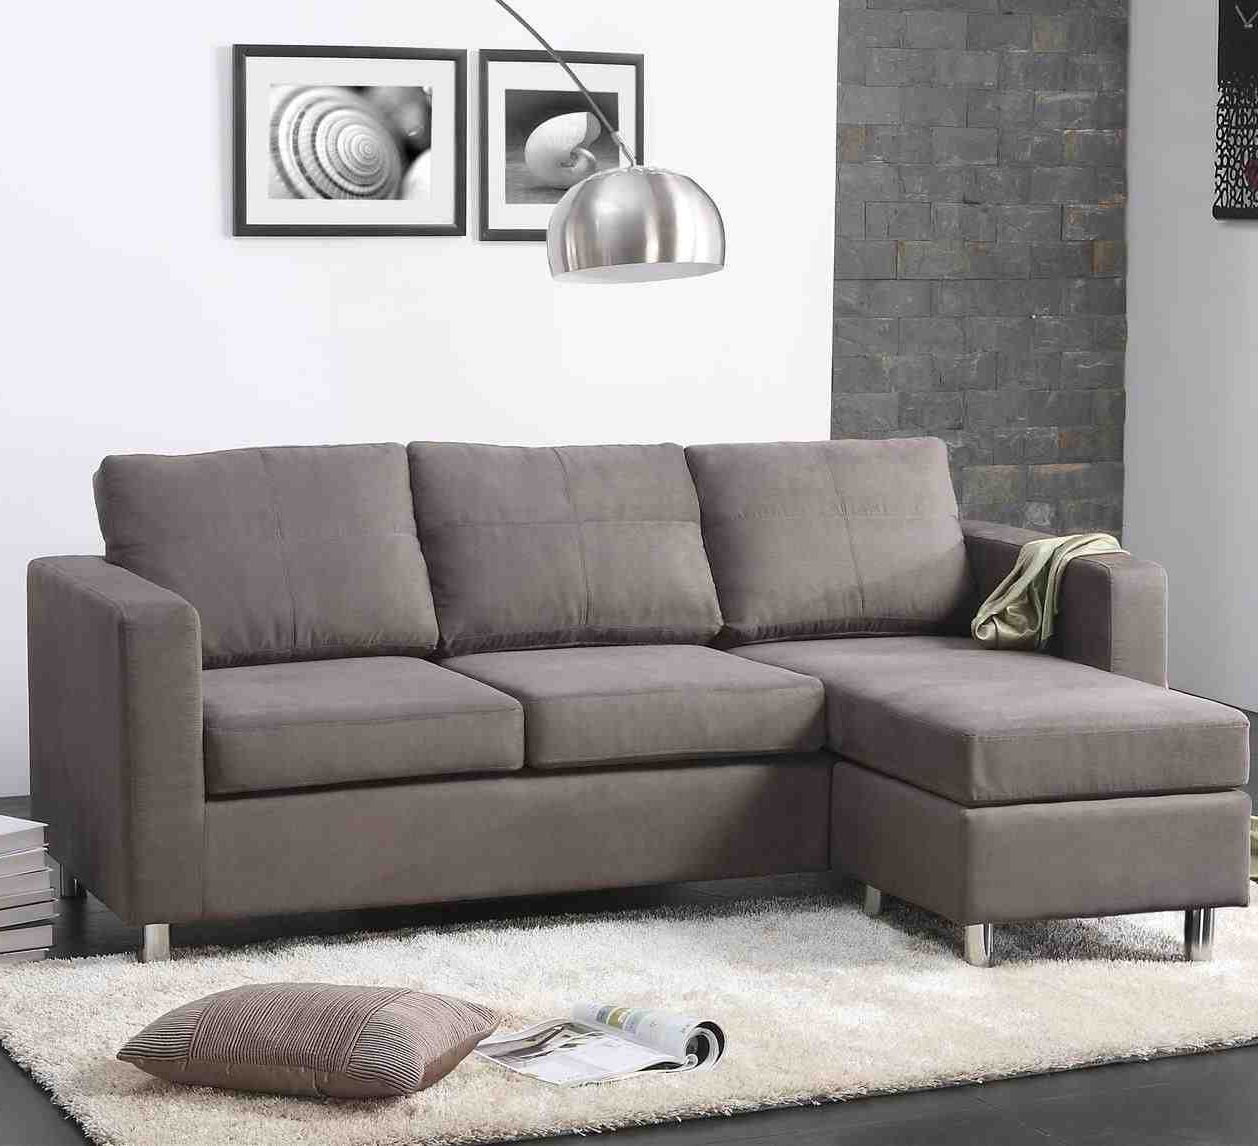 Small L Shaped Sectional Sofa – Home Furniture Design Within Small L Shaped Sectional Sofas In Beige (Gallery 12 of 20)